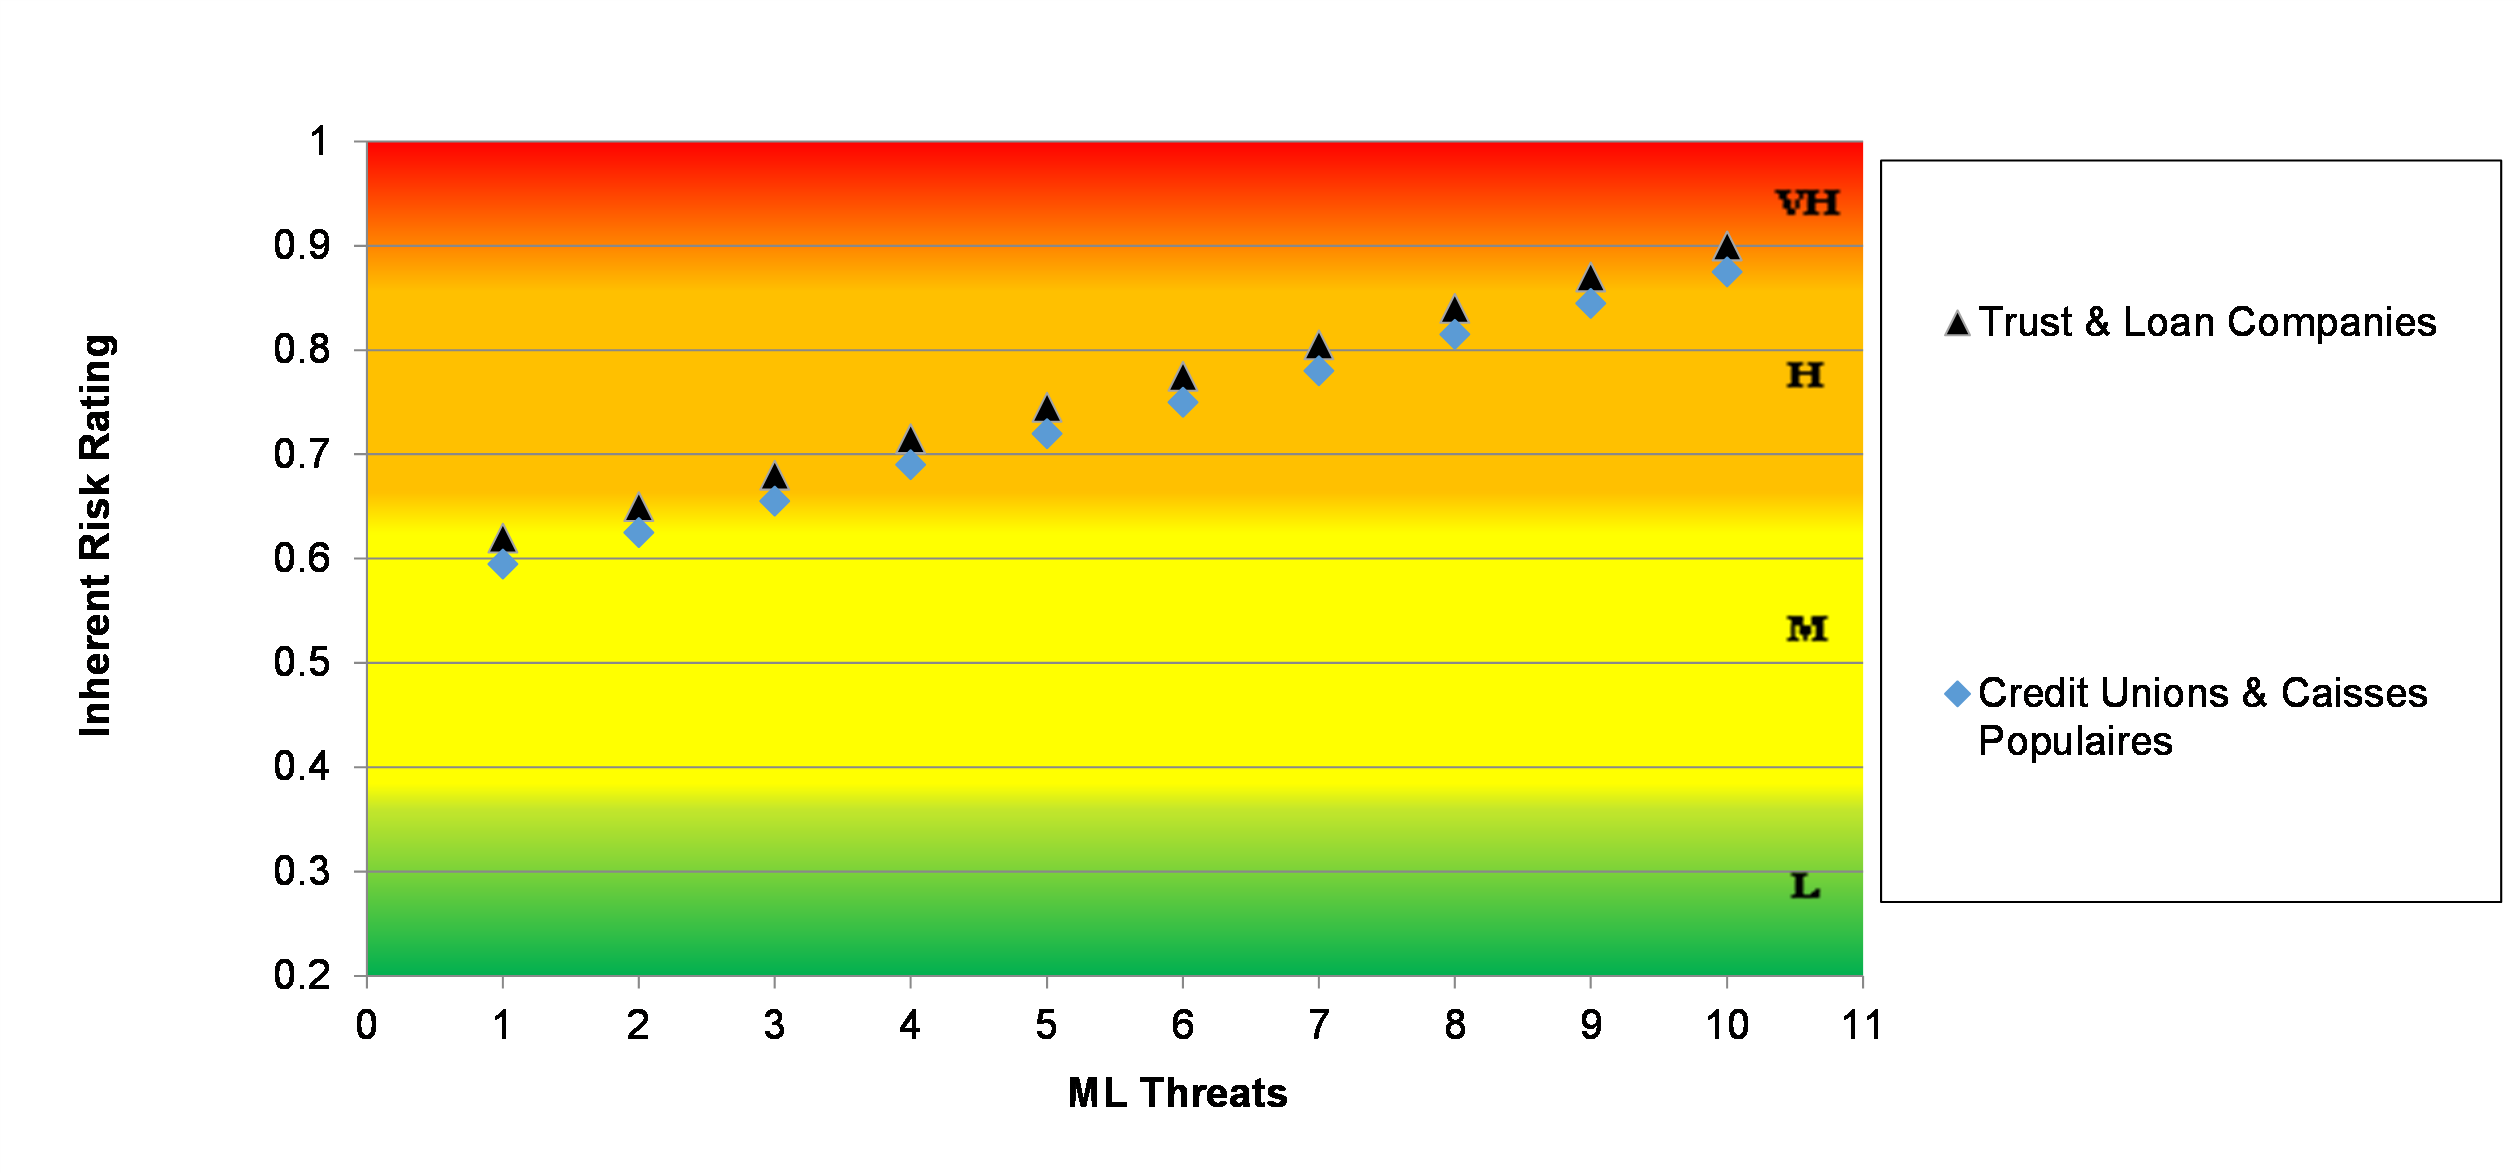 Figure 1b: Inherent ML Risks in Non-Bank Deposit-Taking Financial Institutions by Type of ML Threats